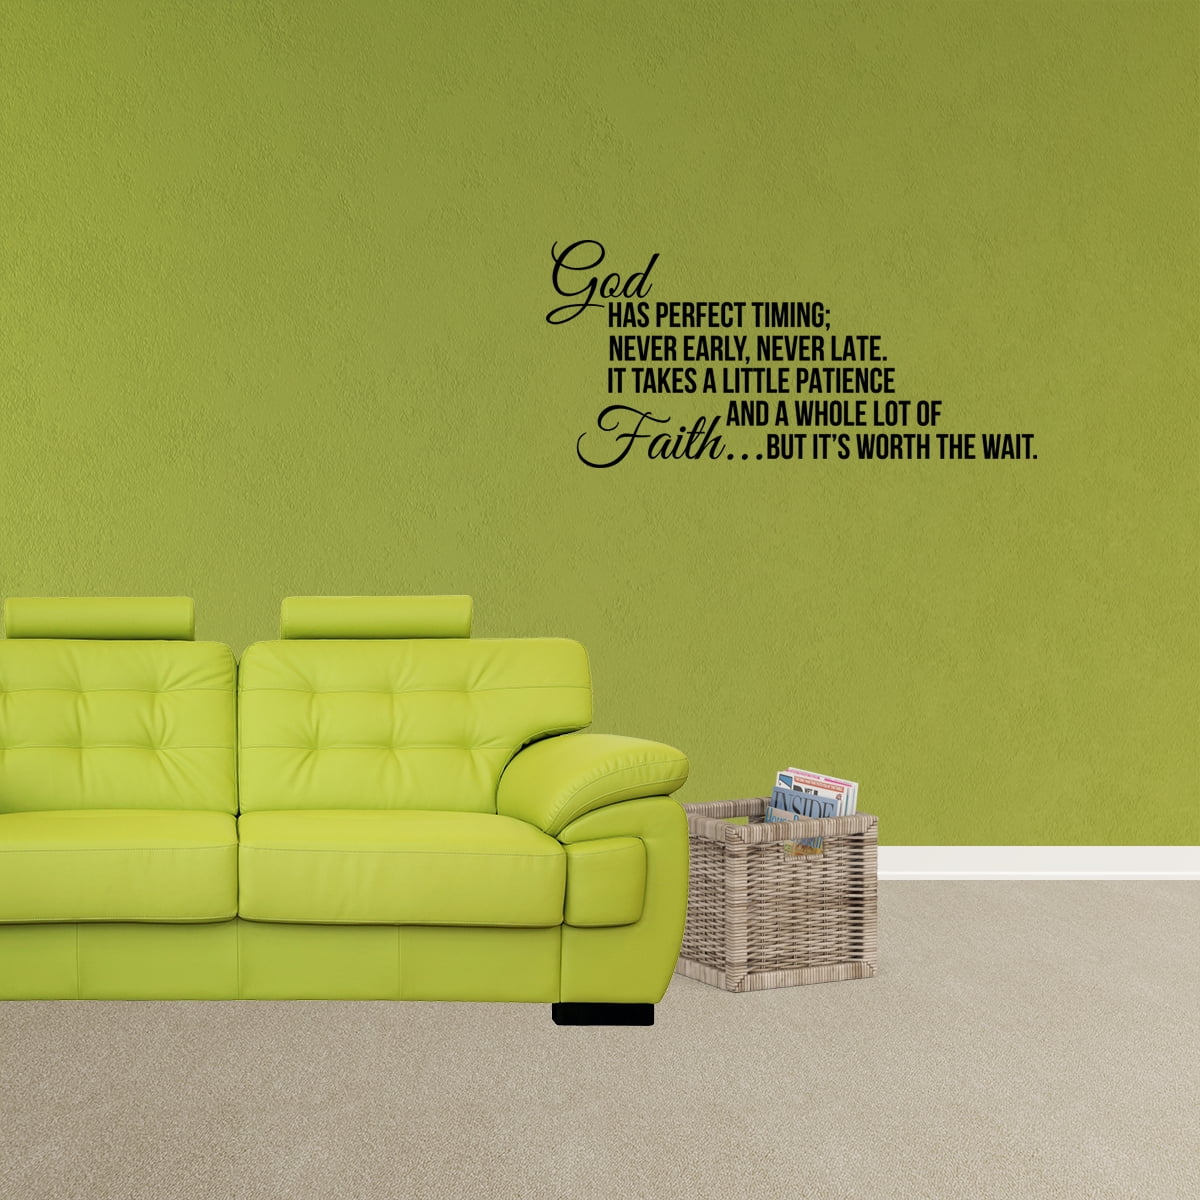 Henry Ford Quote Inspirational Wall Decal Home Decor Typography 36 x 16 inches 